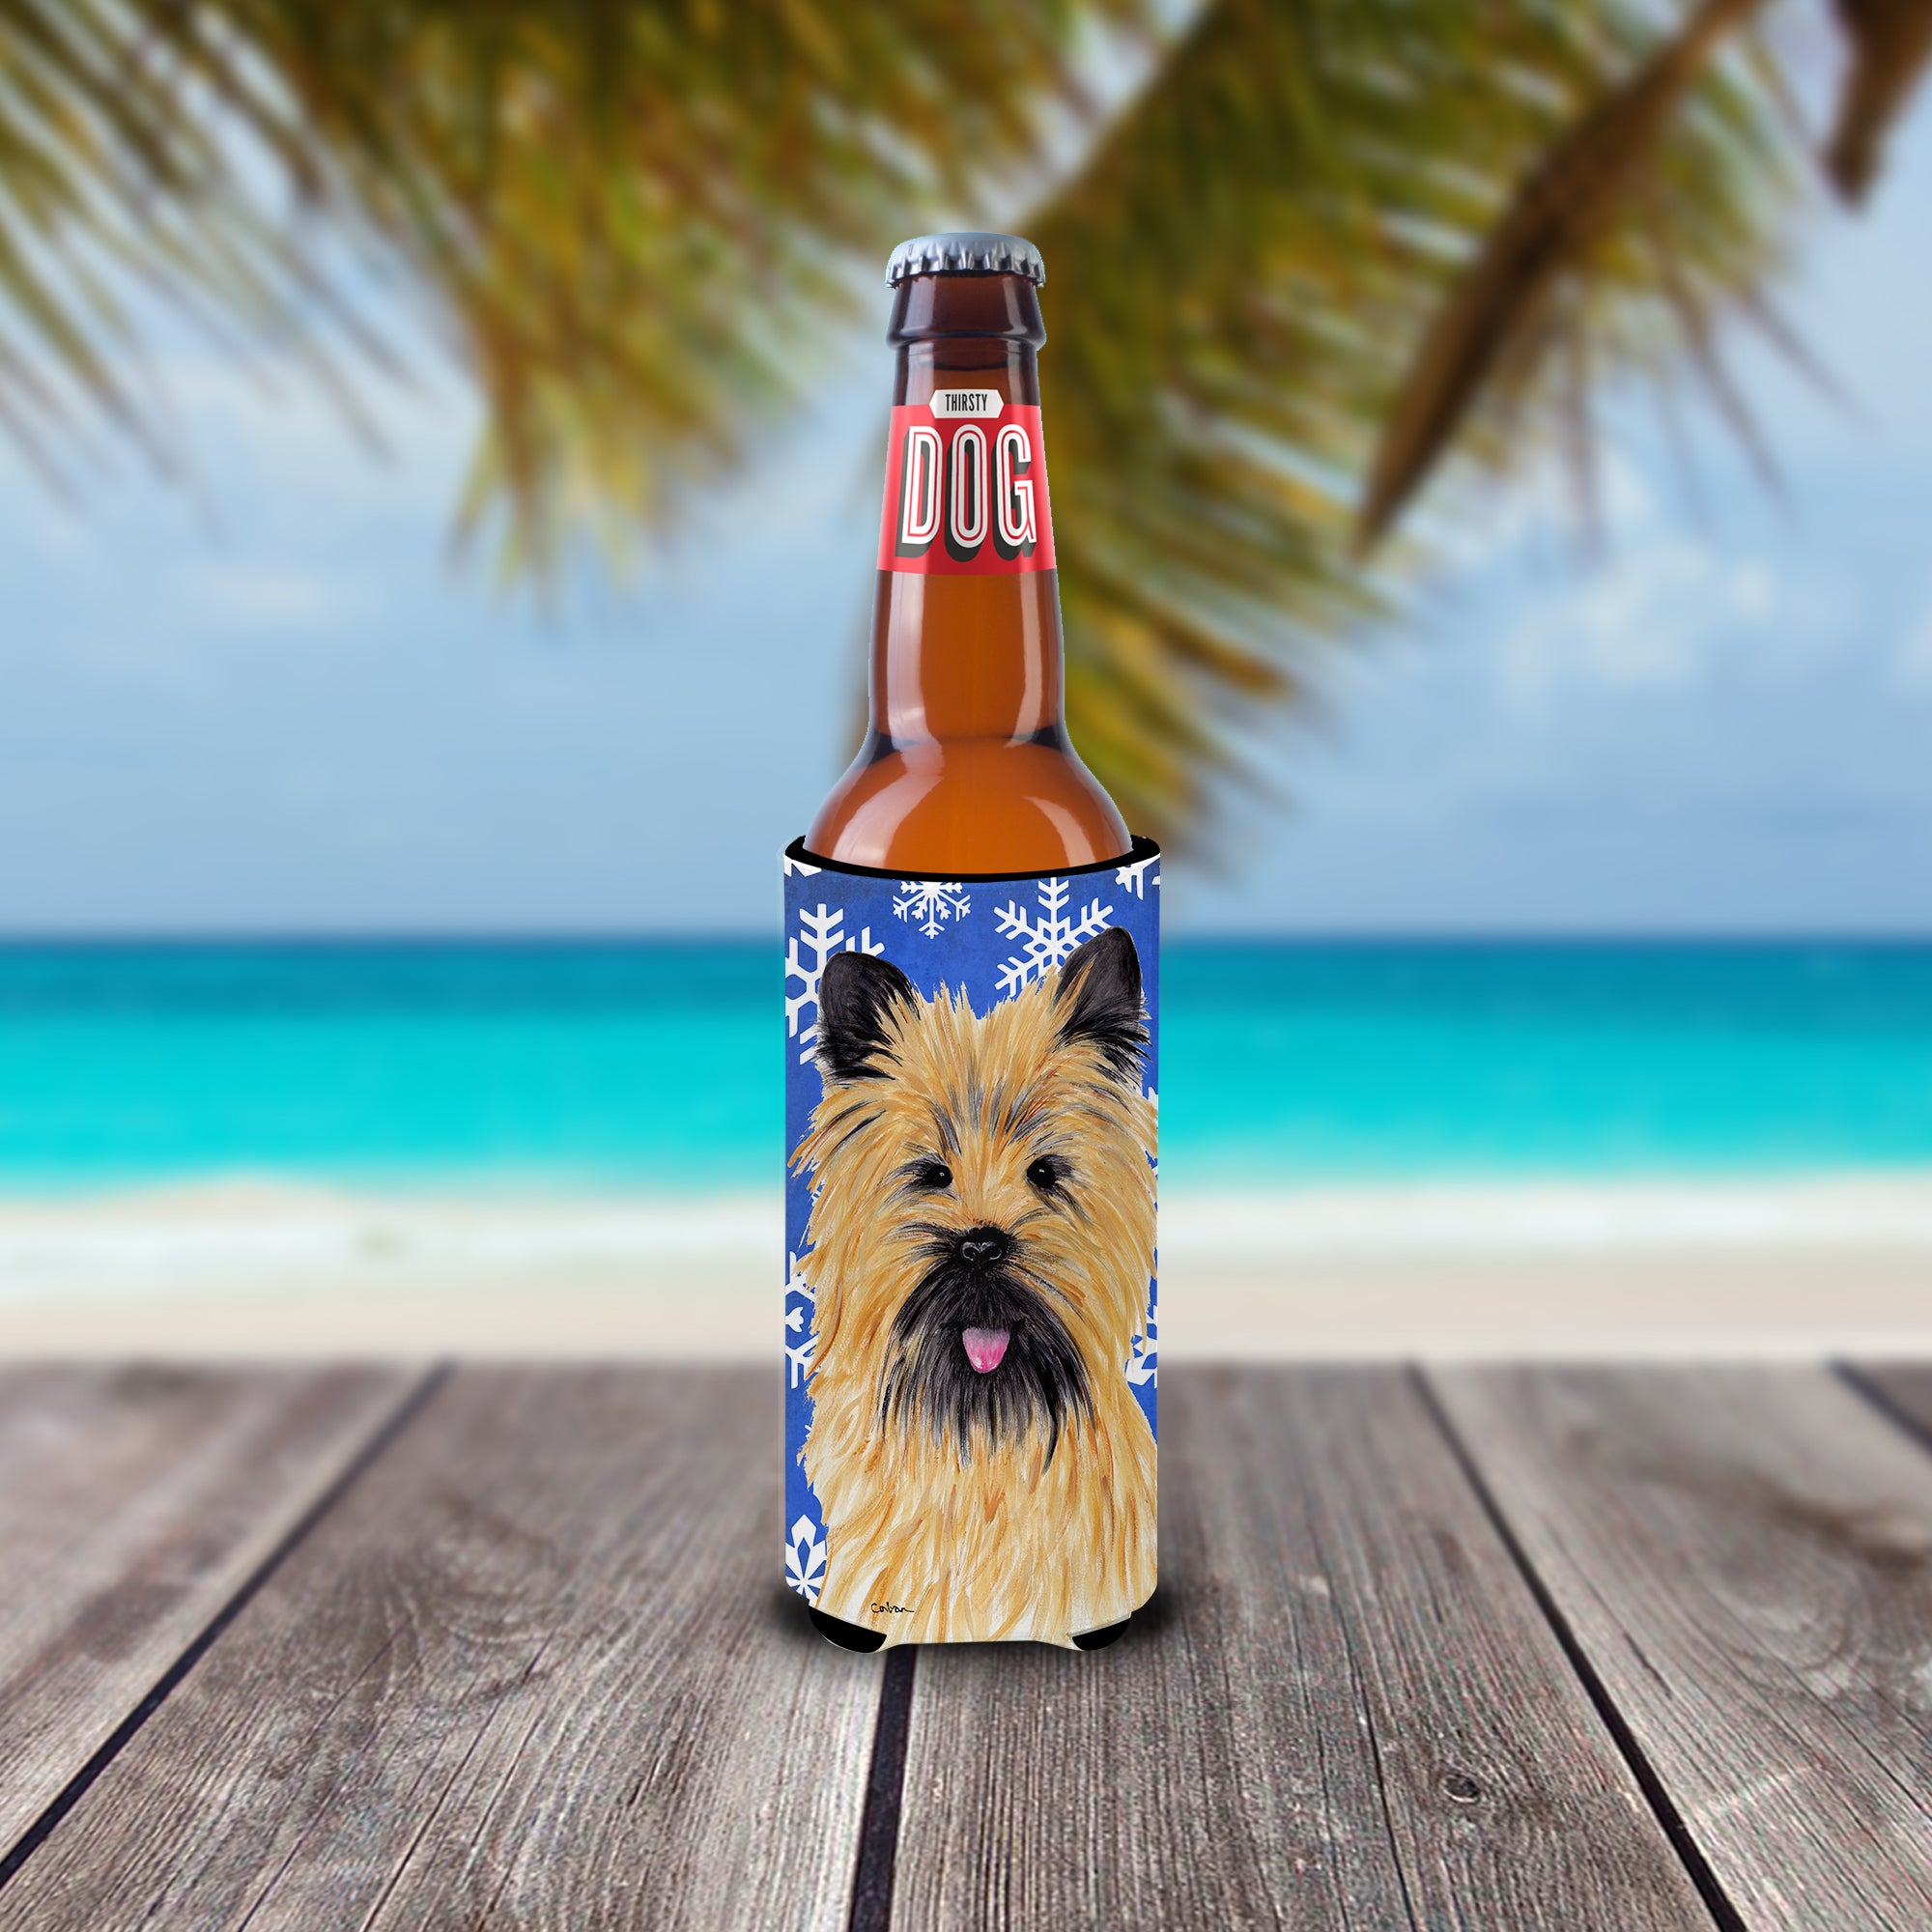 Cairn Terrier Winter Snowflakes Holiday Ultra Beverage Insulators for slim cans SC9375MUK